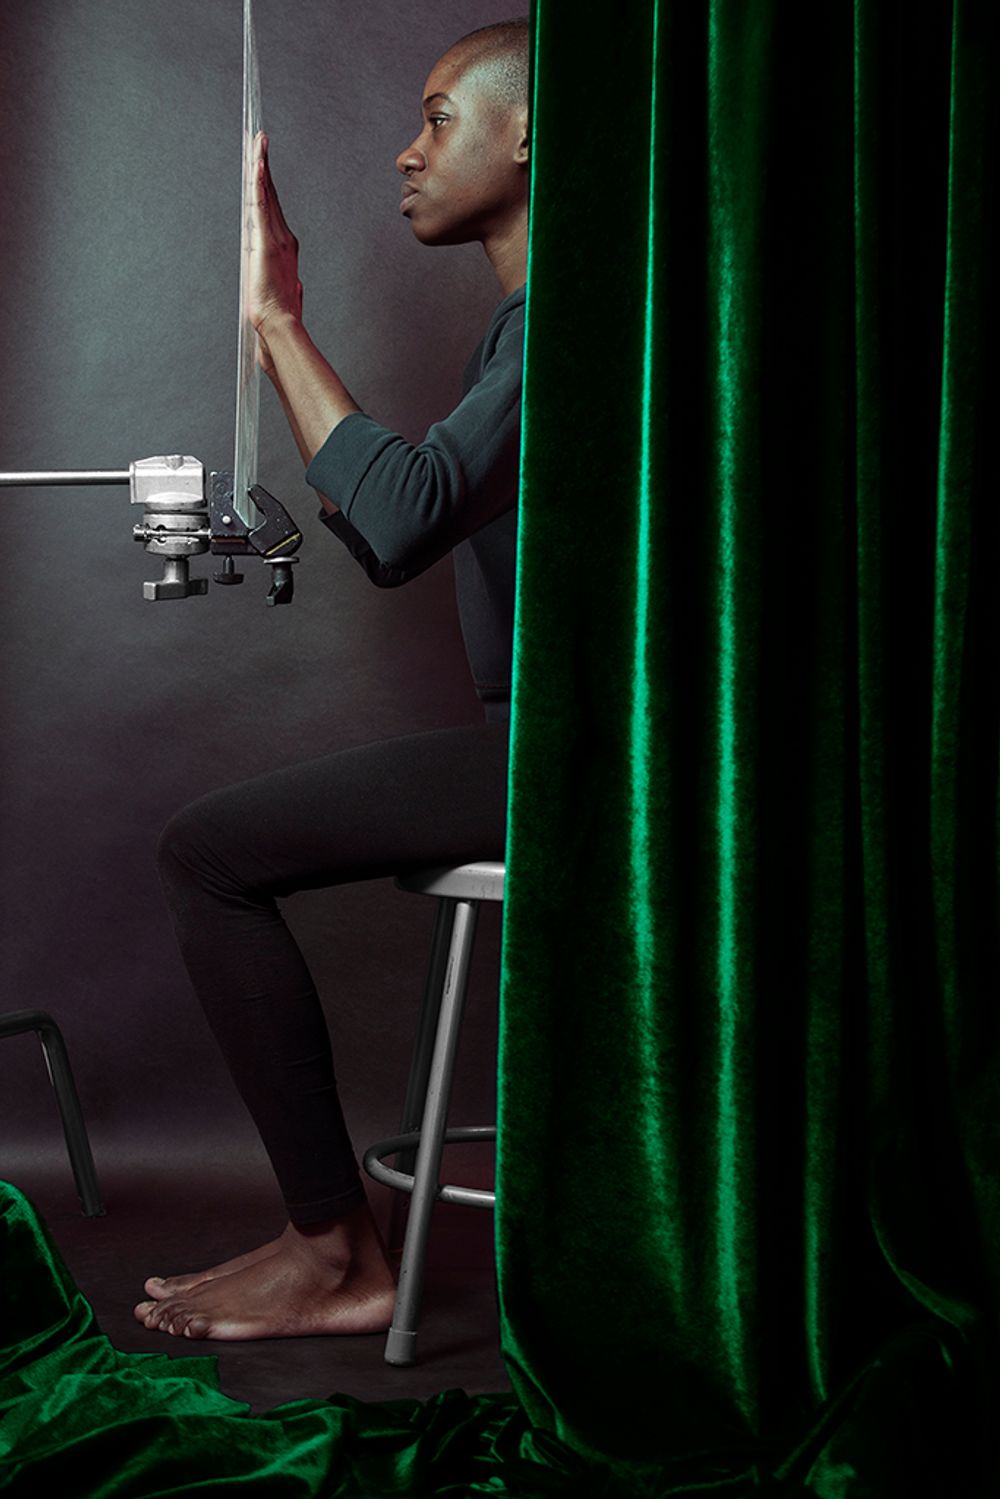 black person sitting on stool behind green curtain with hand flexed